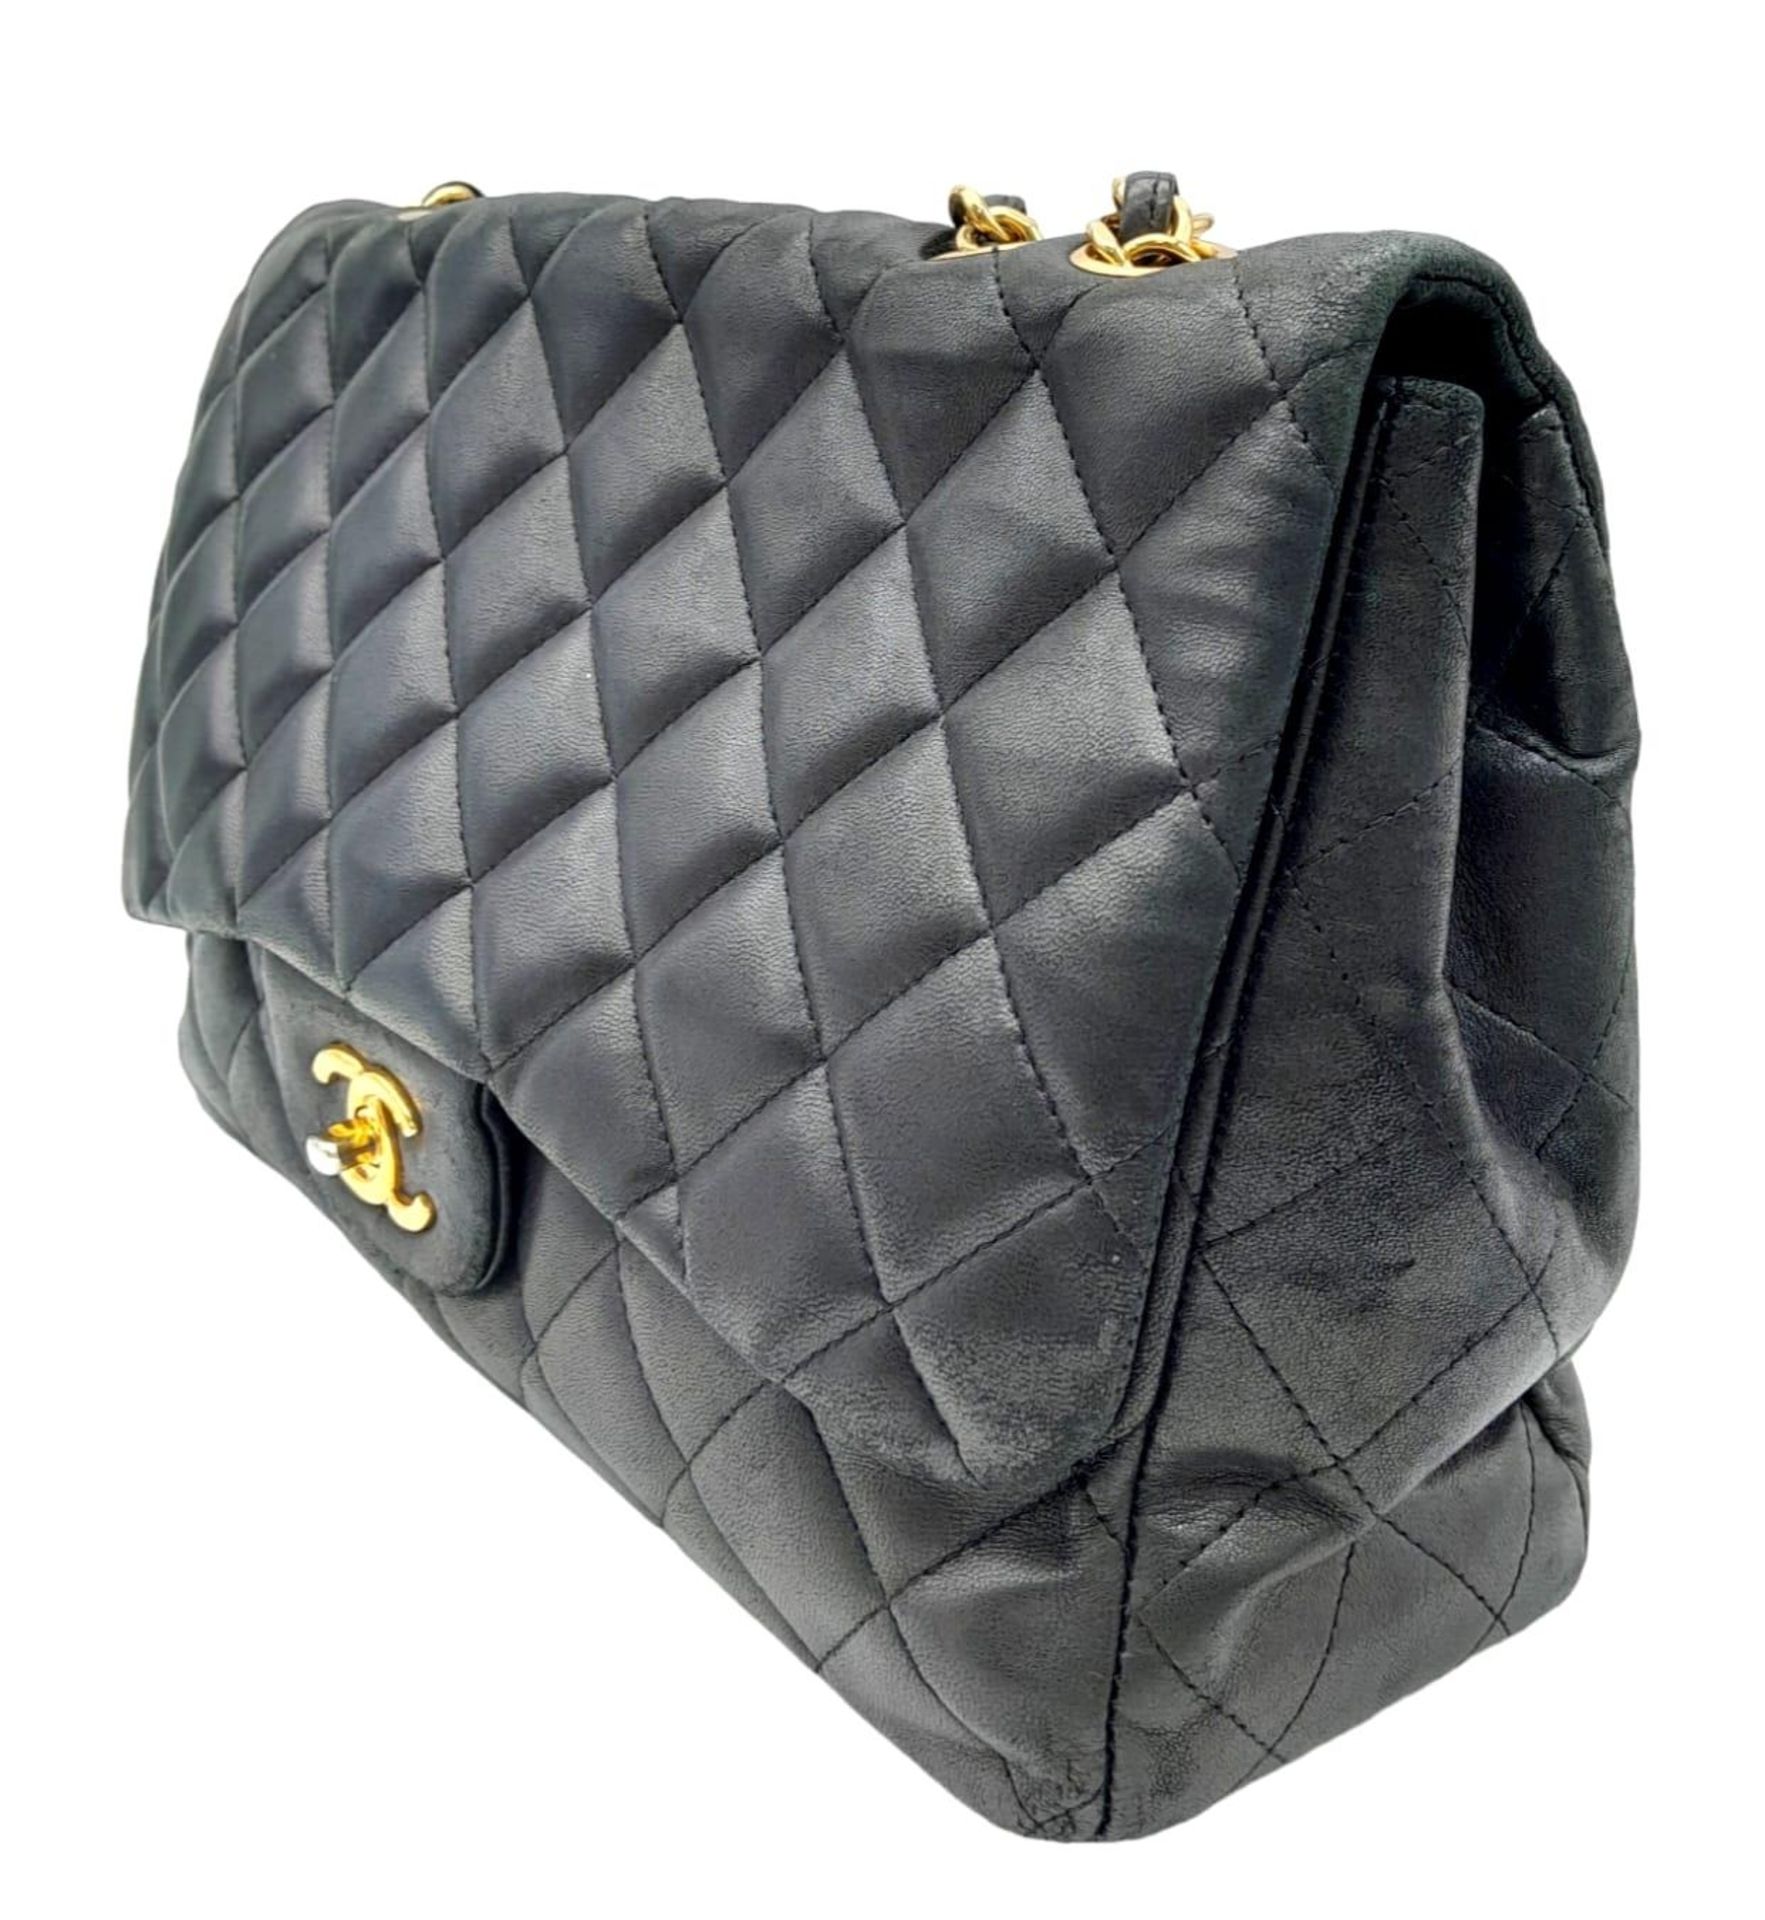 A Chanel Black Caviar Classic Single Flap Bag. Quilted pebbled leather exterior with gold-toned - Image 4 of 19